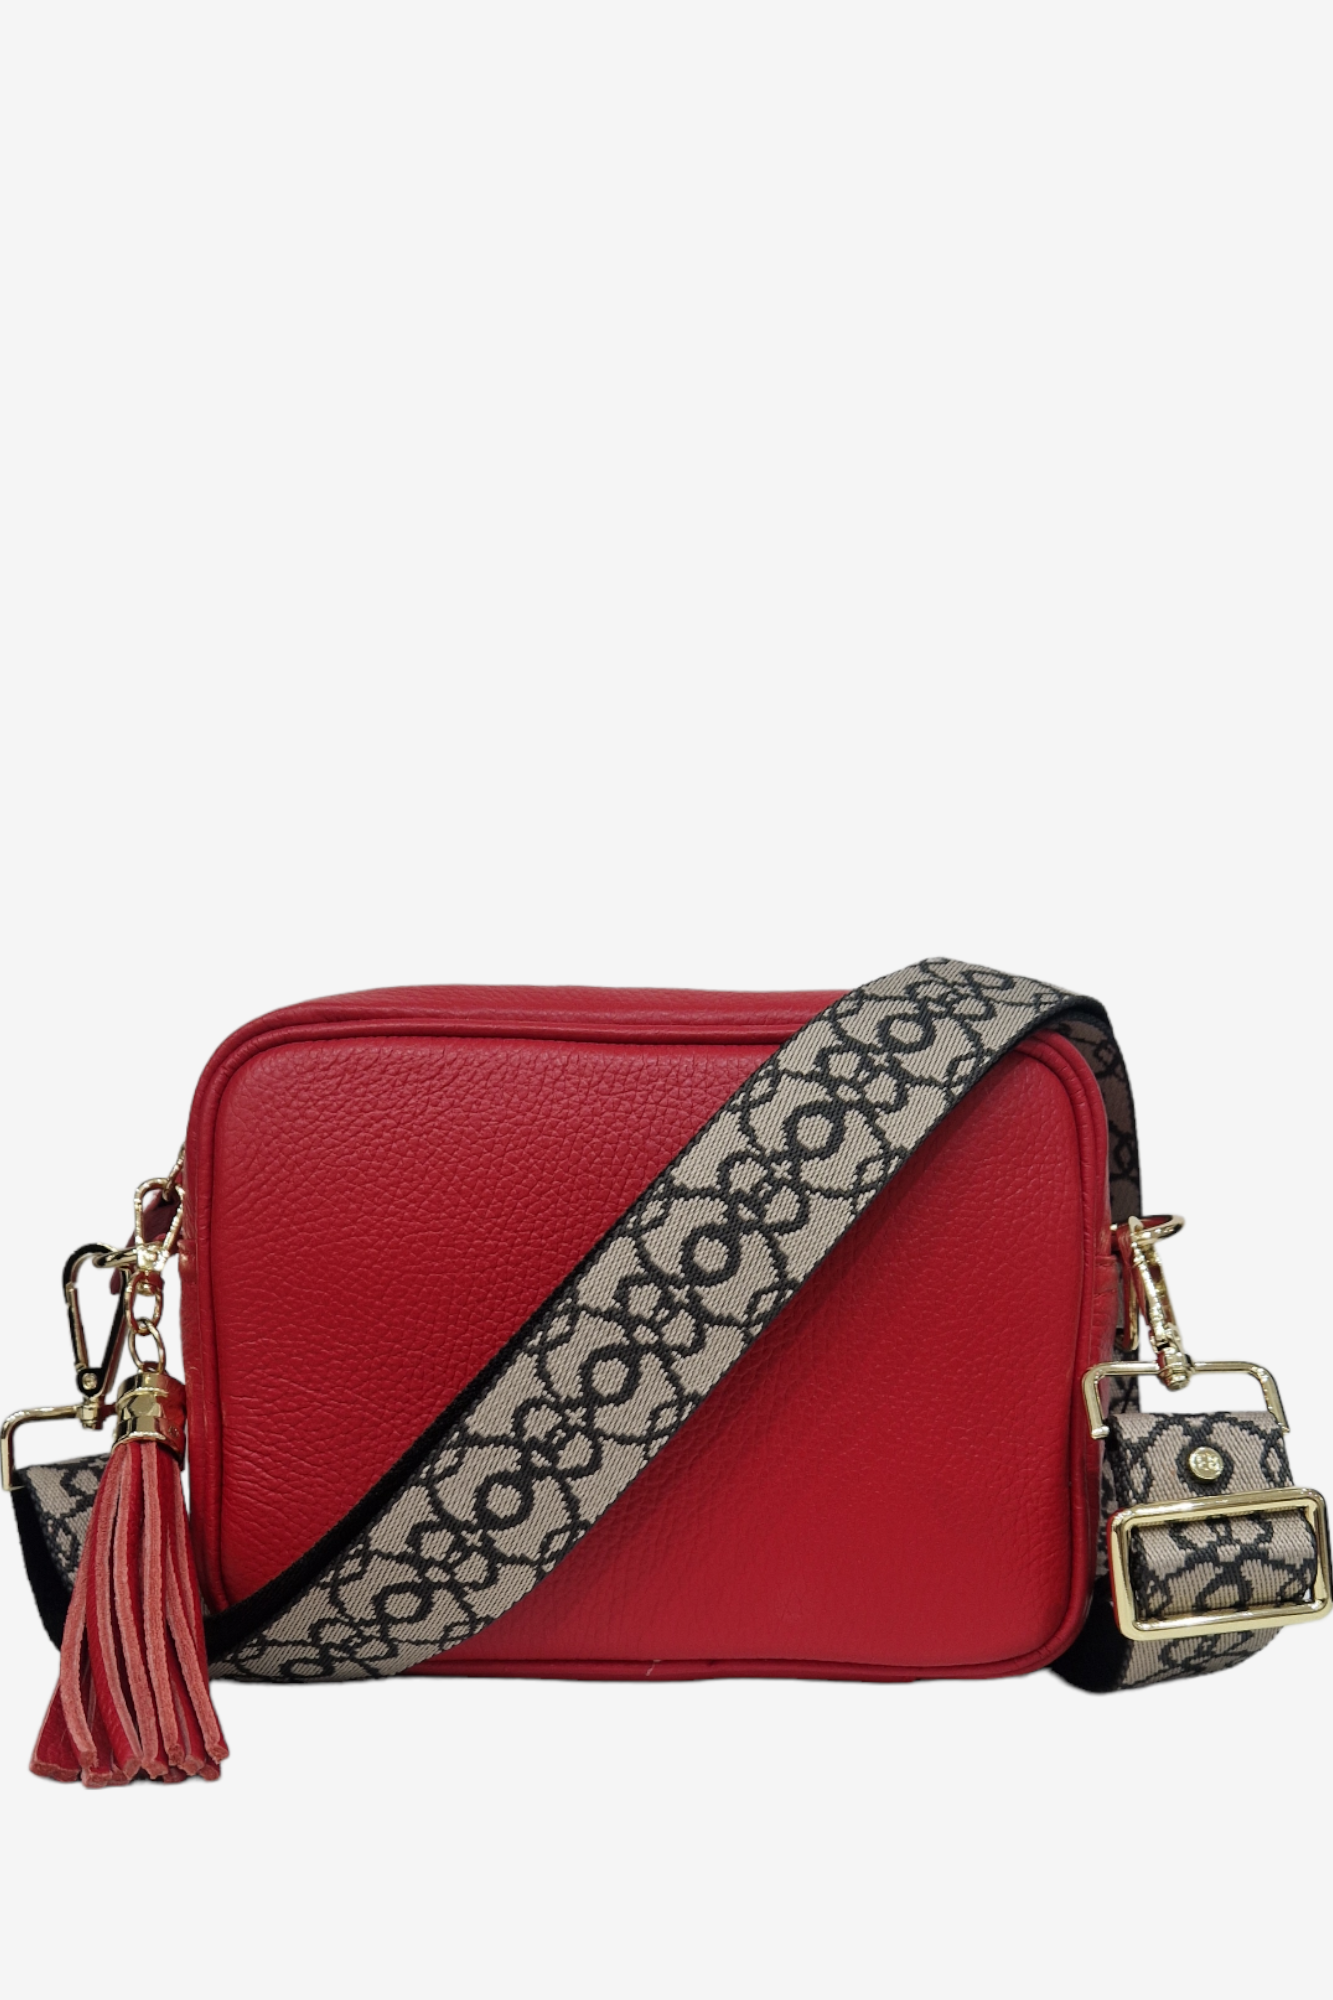 ELIE BEAUMONT RED LEATHER BAG BAROQUE STRAP